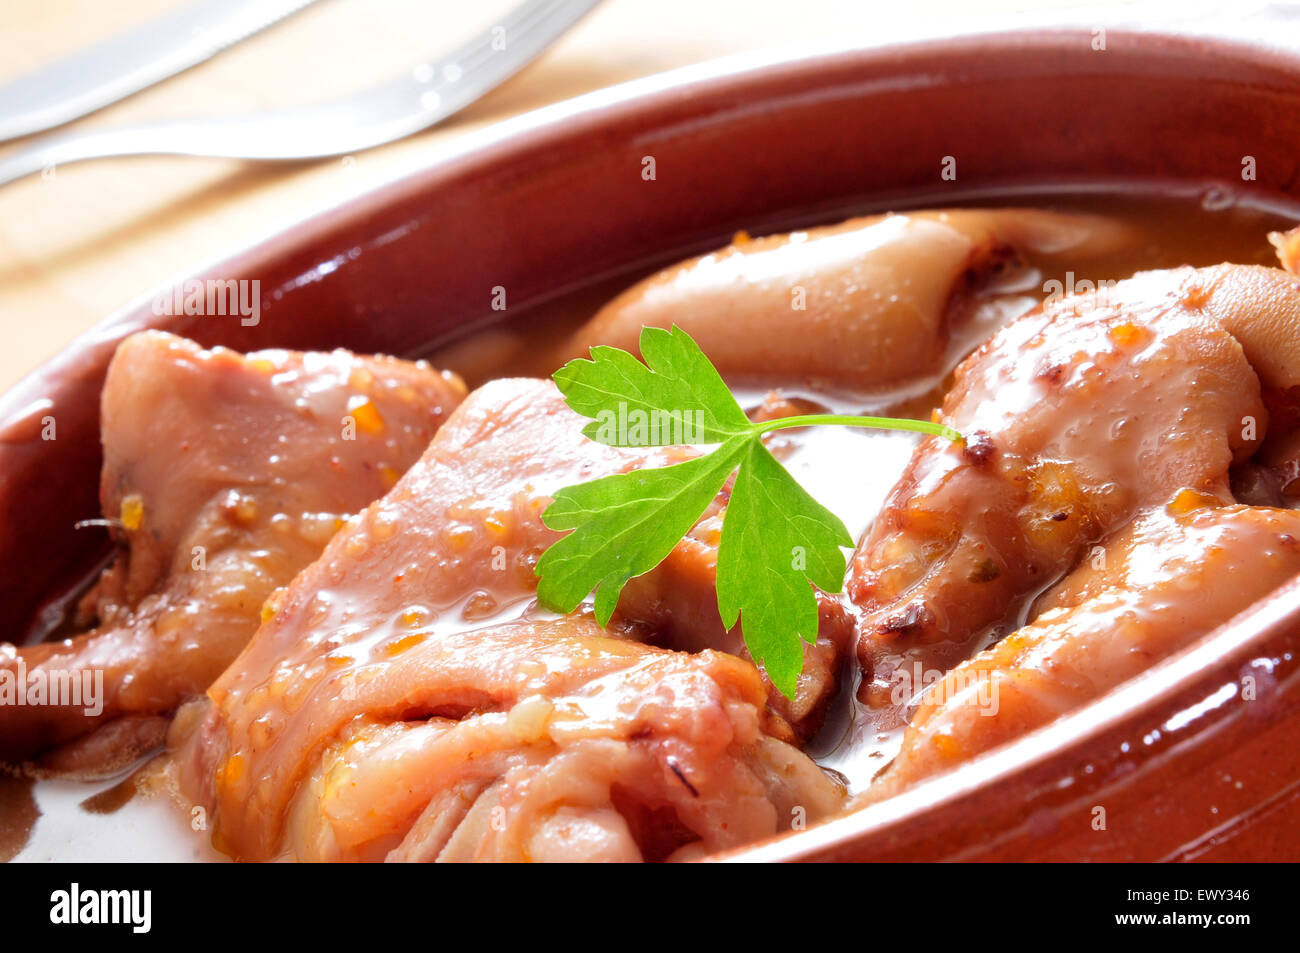 closeup of a earthenware casserole with manitas de cerdo, stewed pig feet typical of Spain Stock Photo